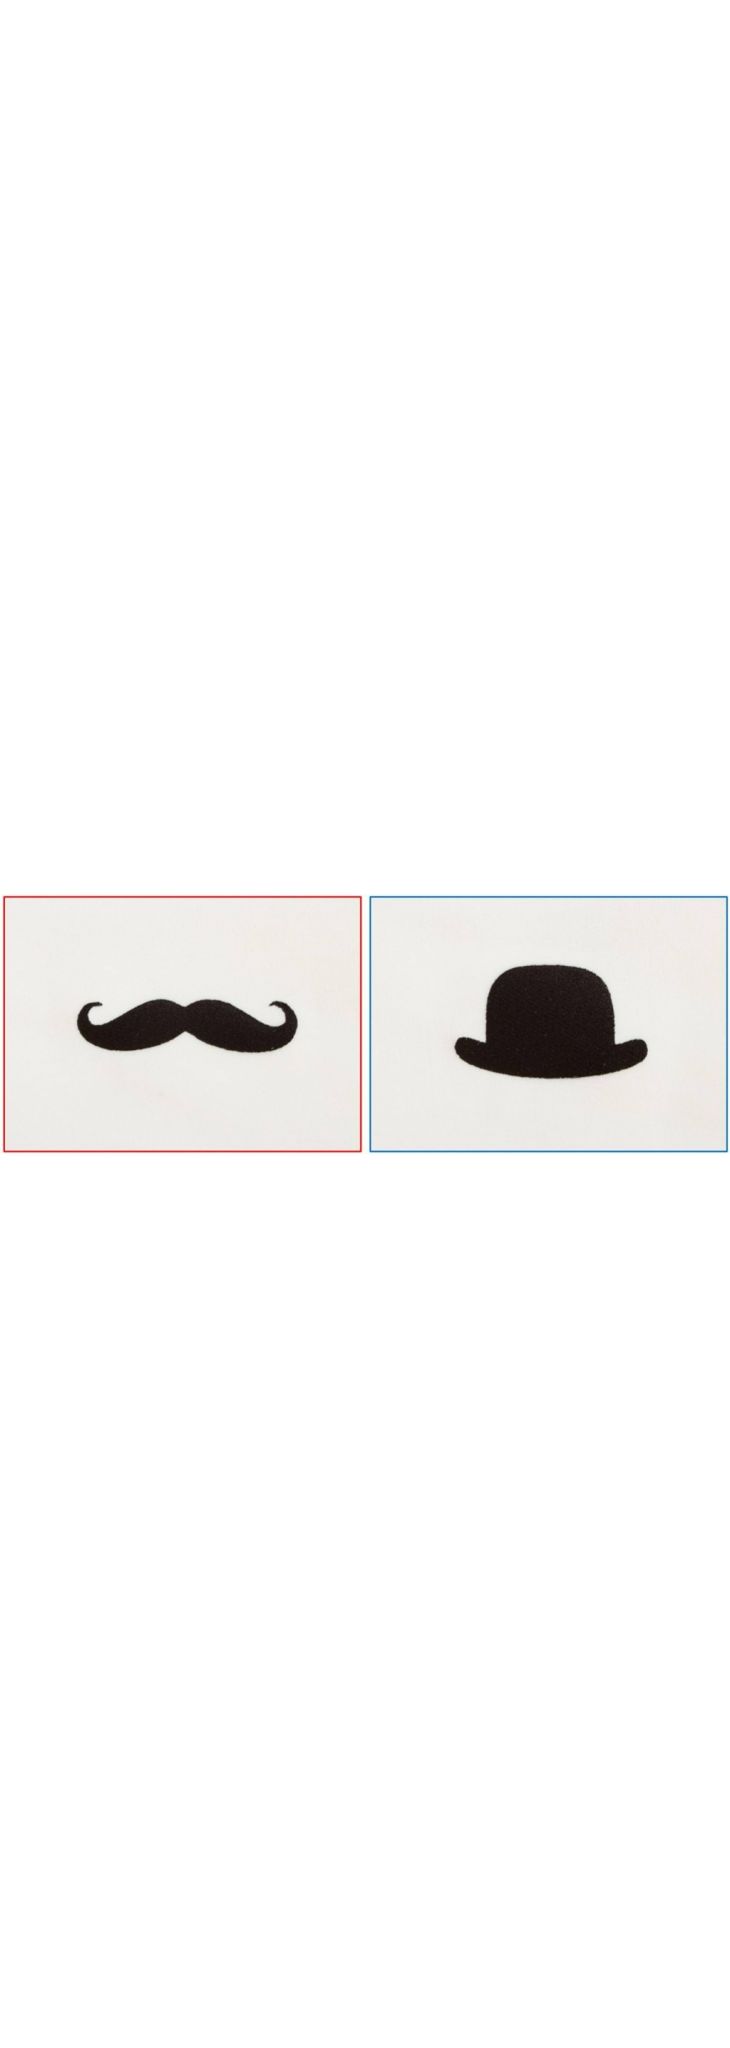 Onesie Embroidery - Moustache and Bowler Hats 